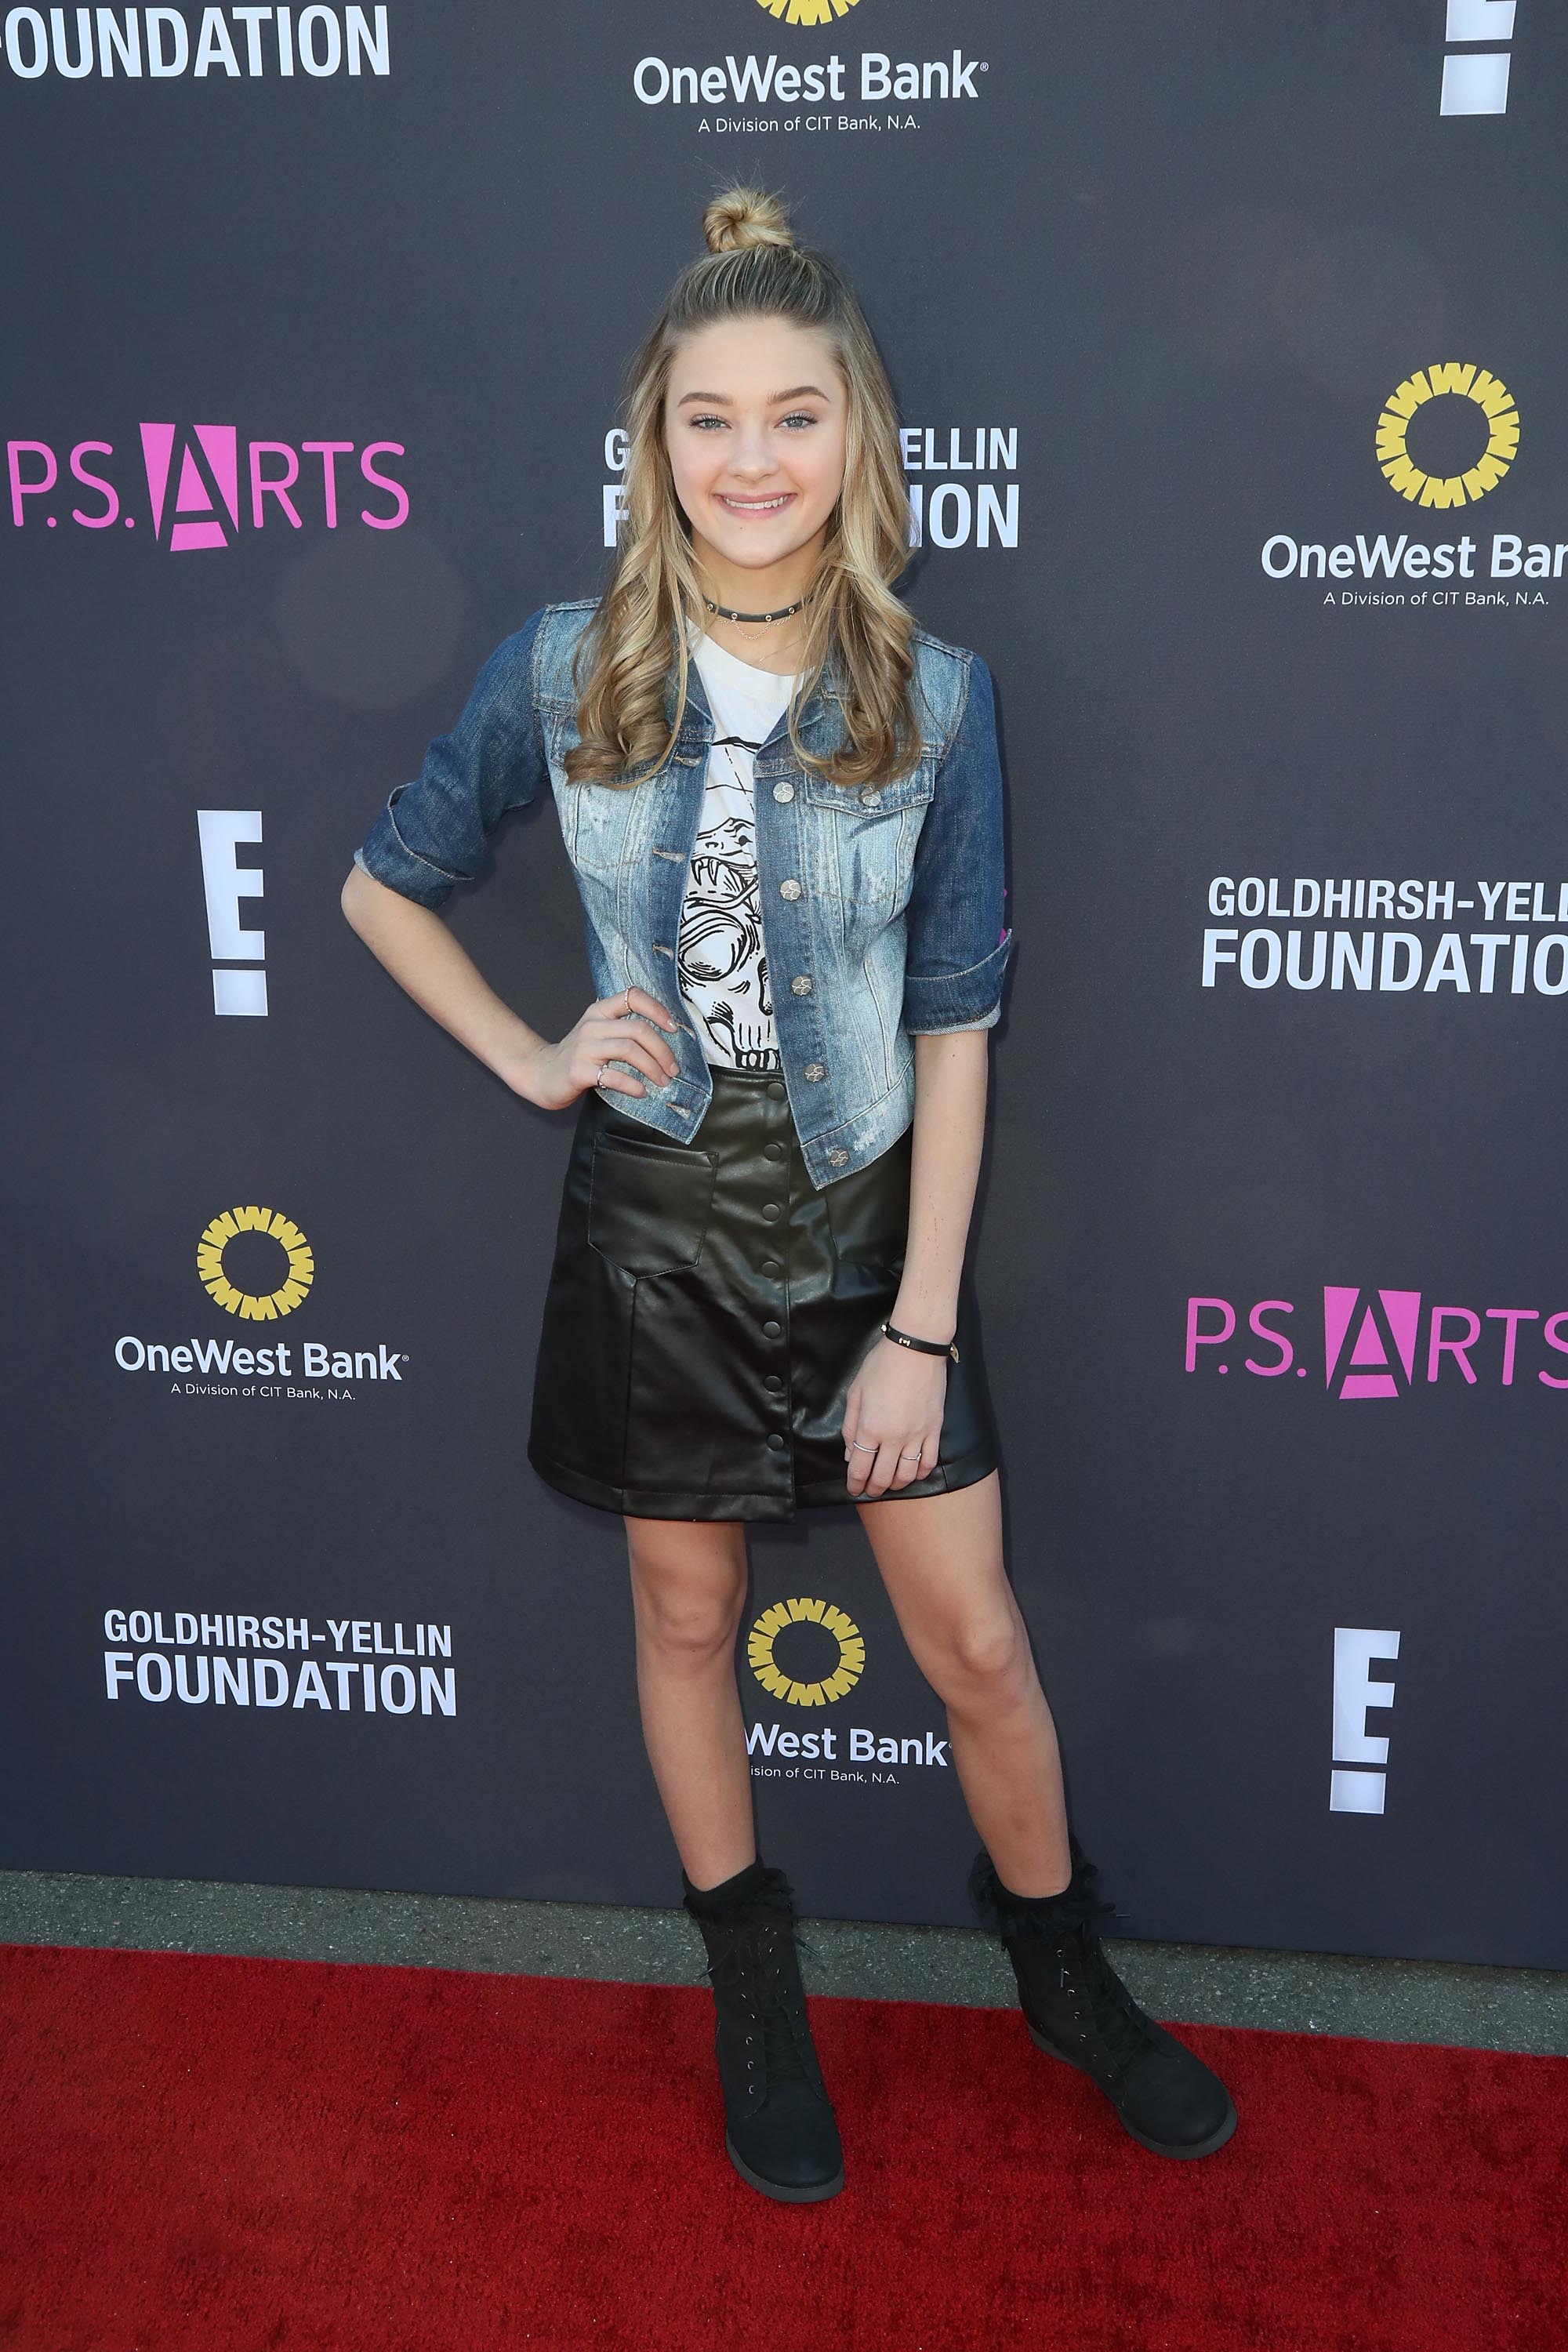 Lizzy Greene attends the P.S. ARTS Express Yourself